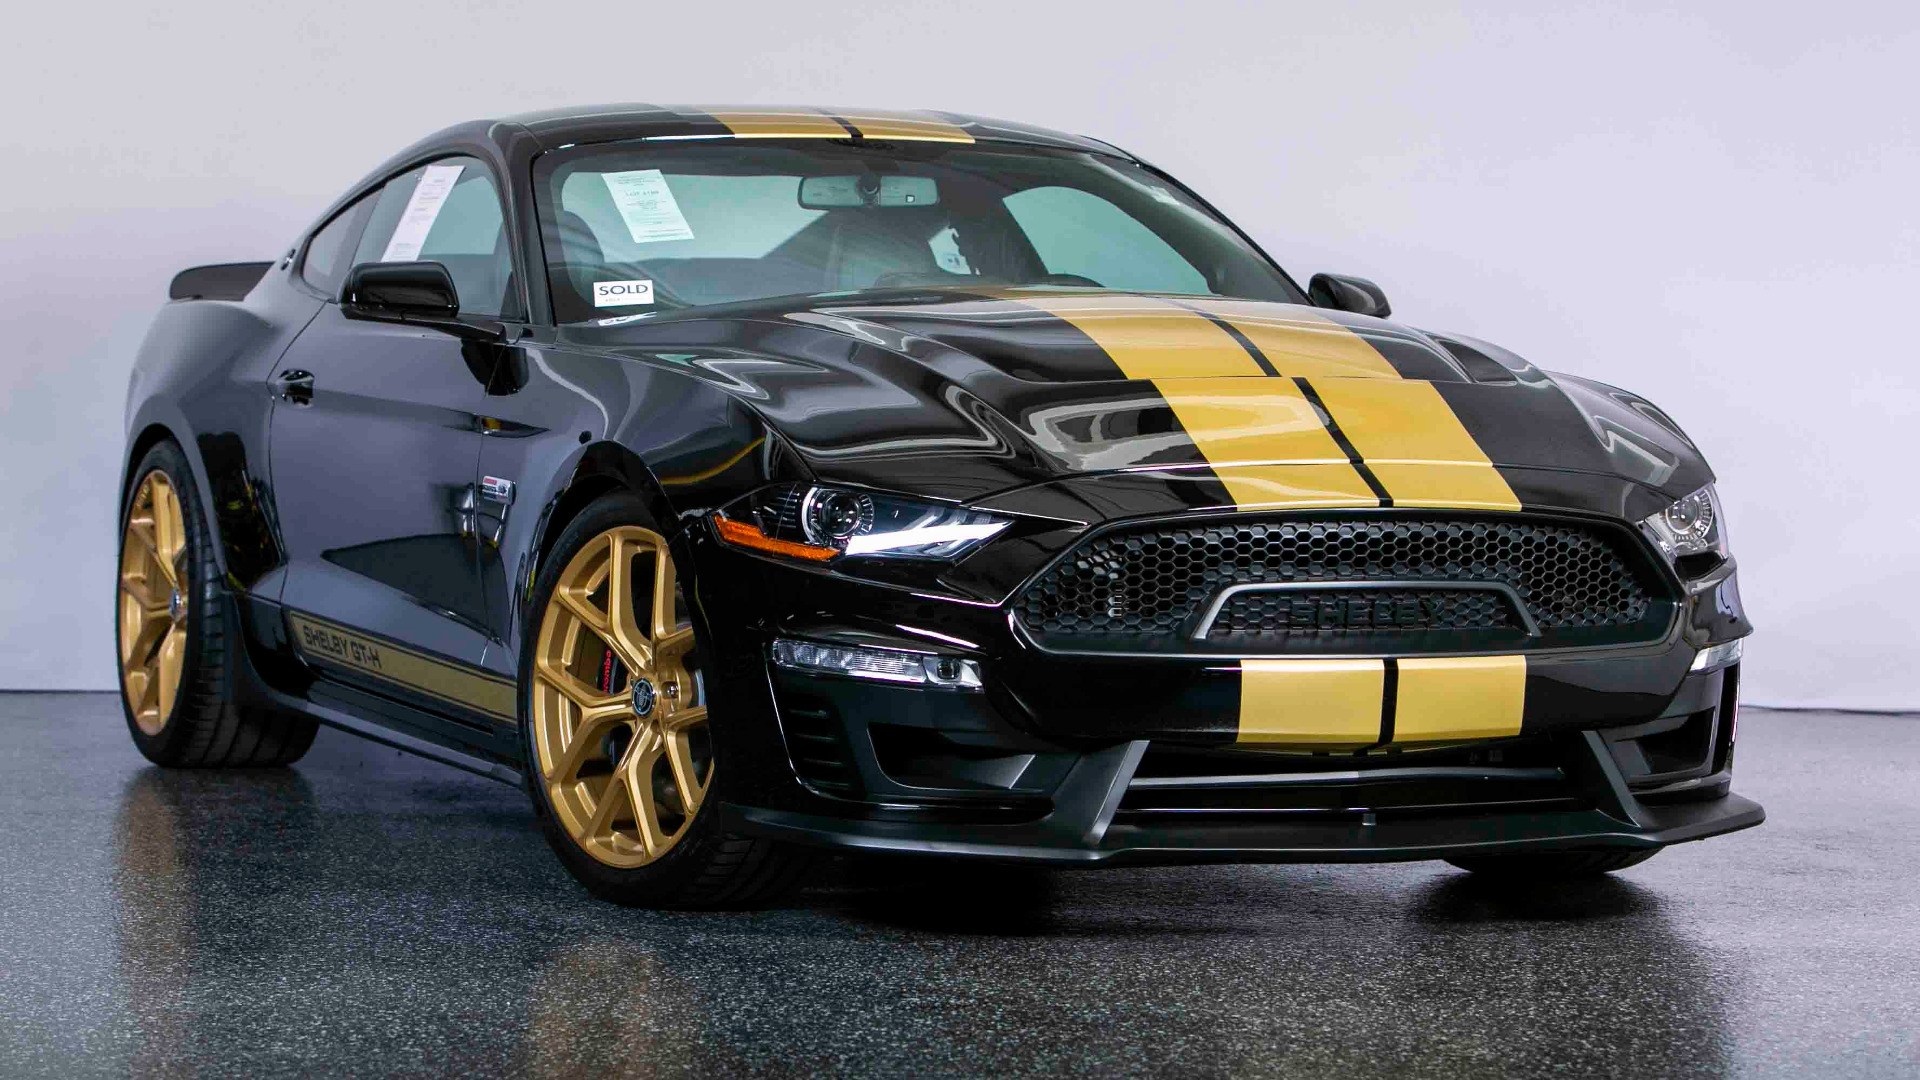 Used 2019 FORD MUSTANG SHELBY GT-H (Heritage) For Sale ($115,750)